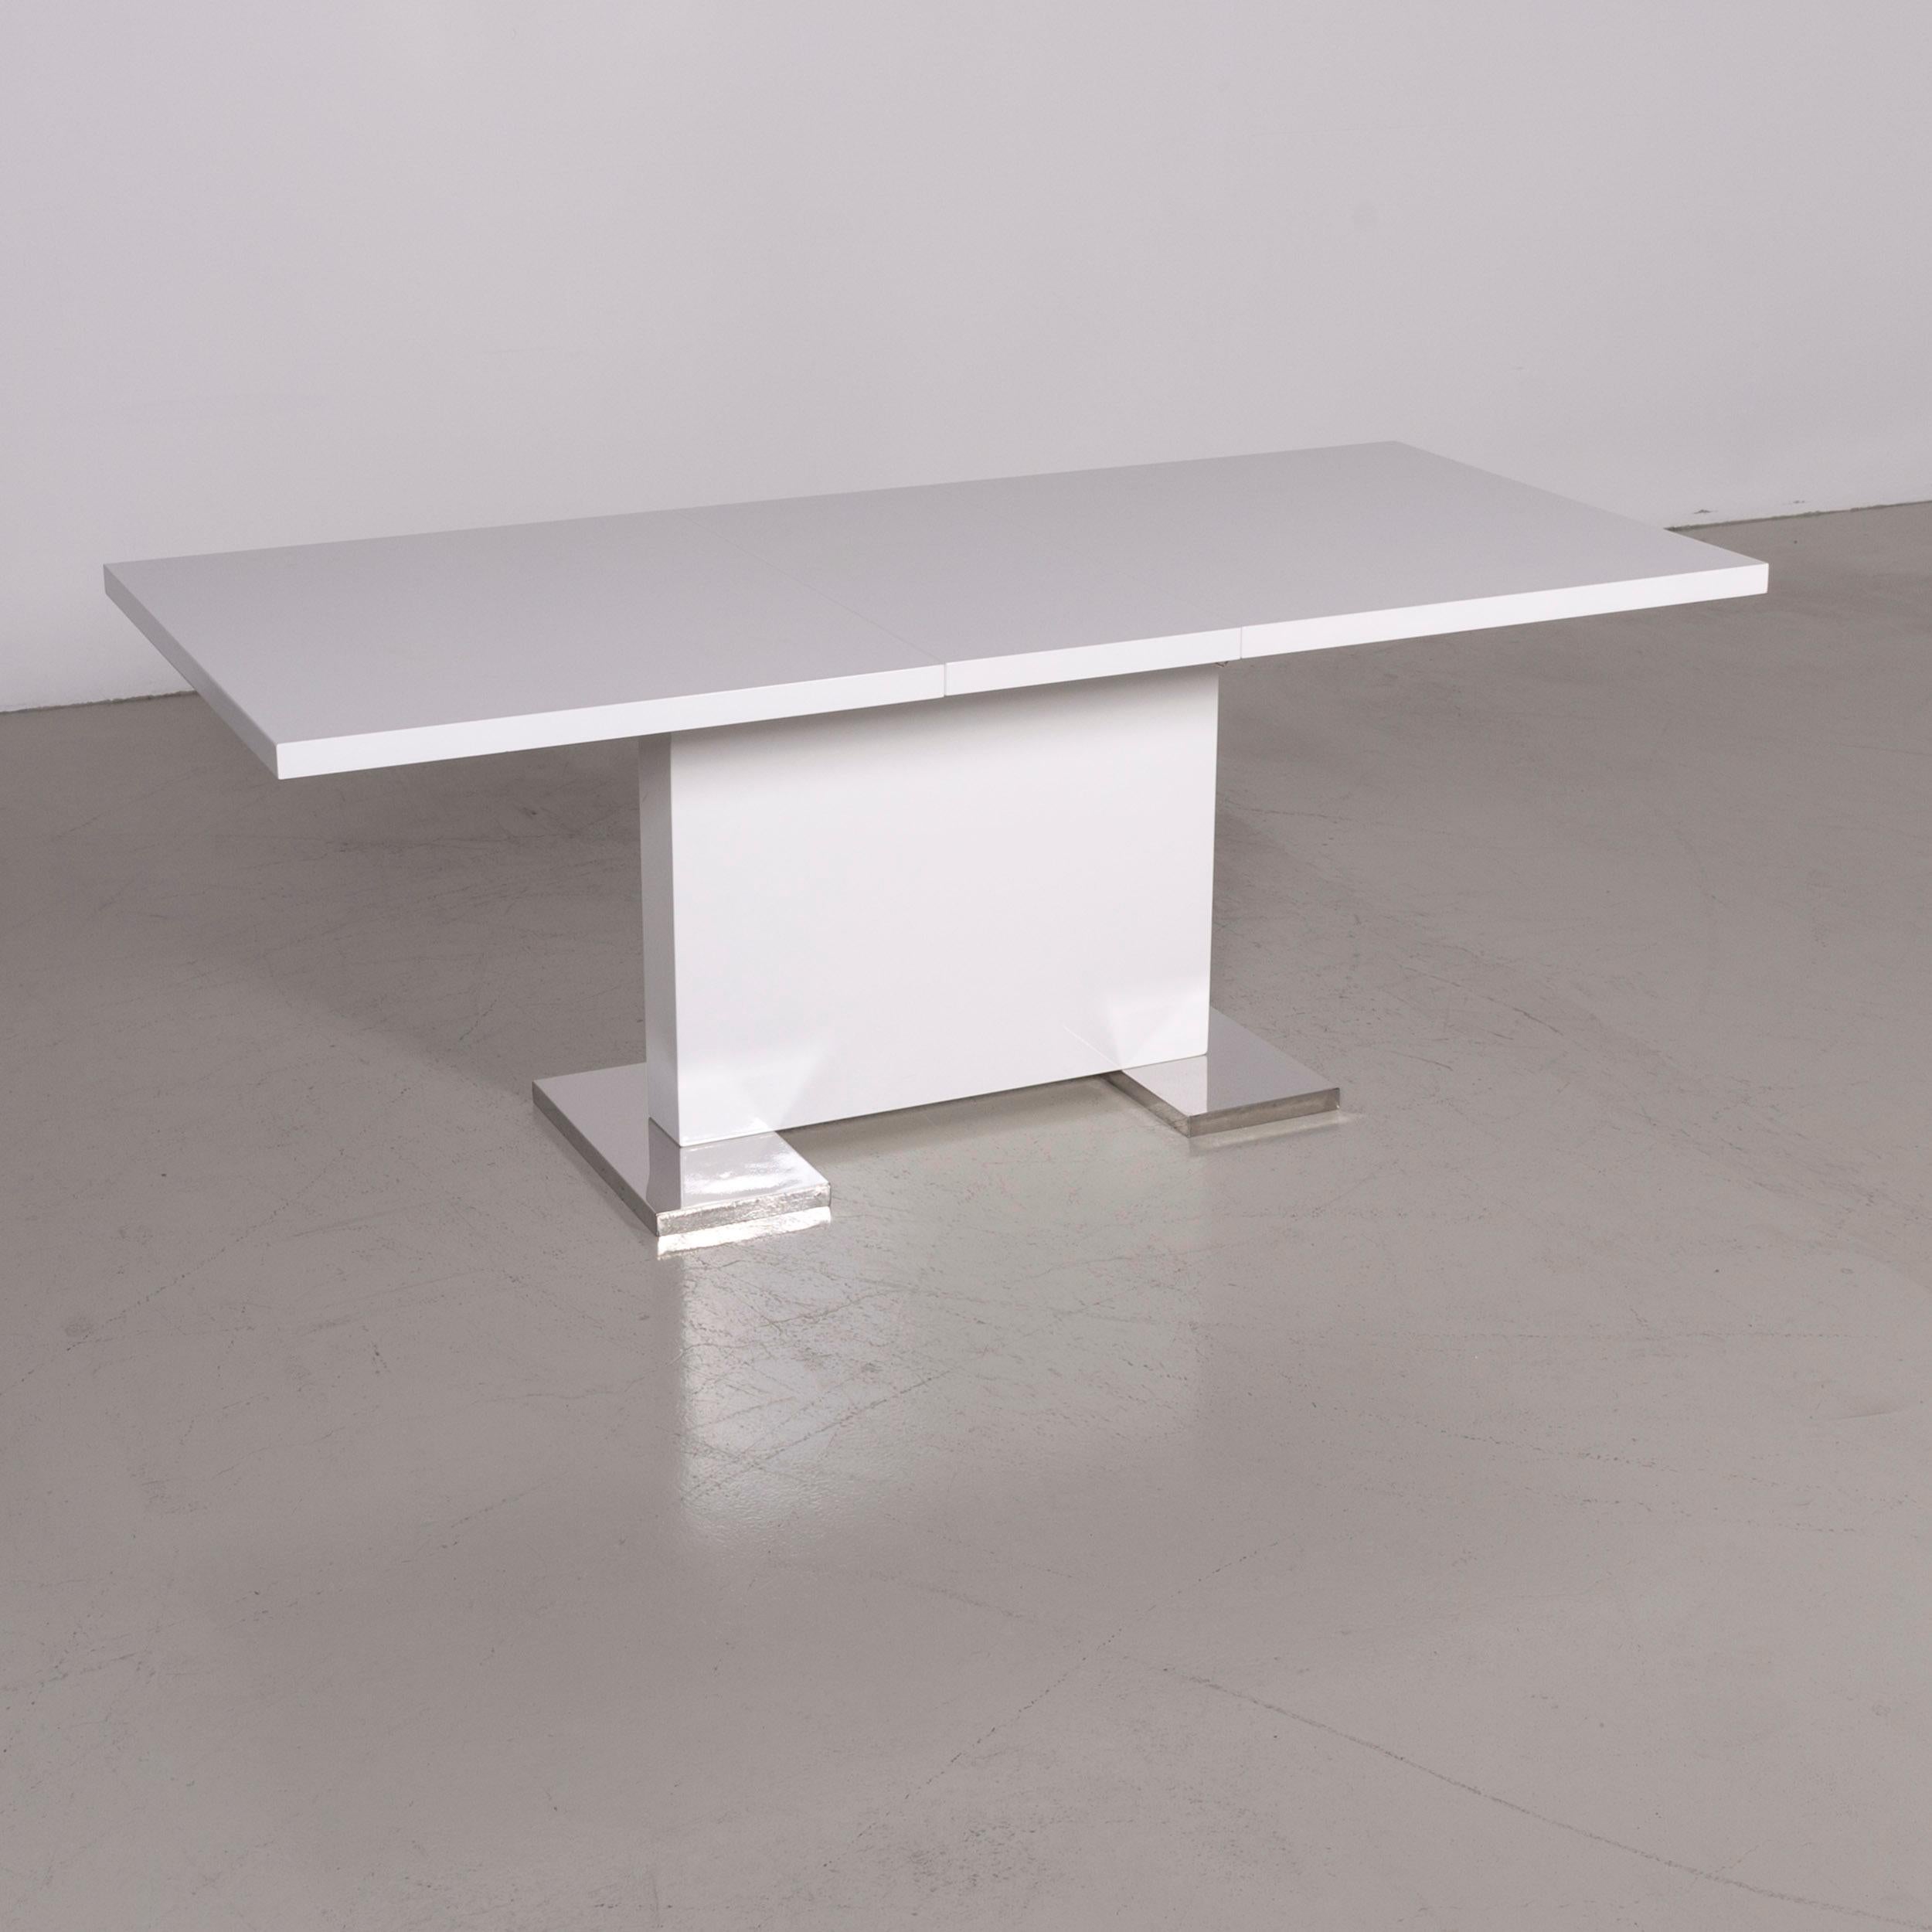 Designer coffee table white glass wood.